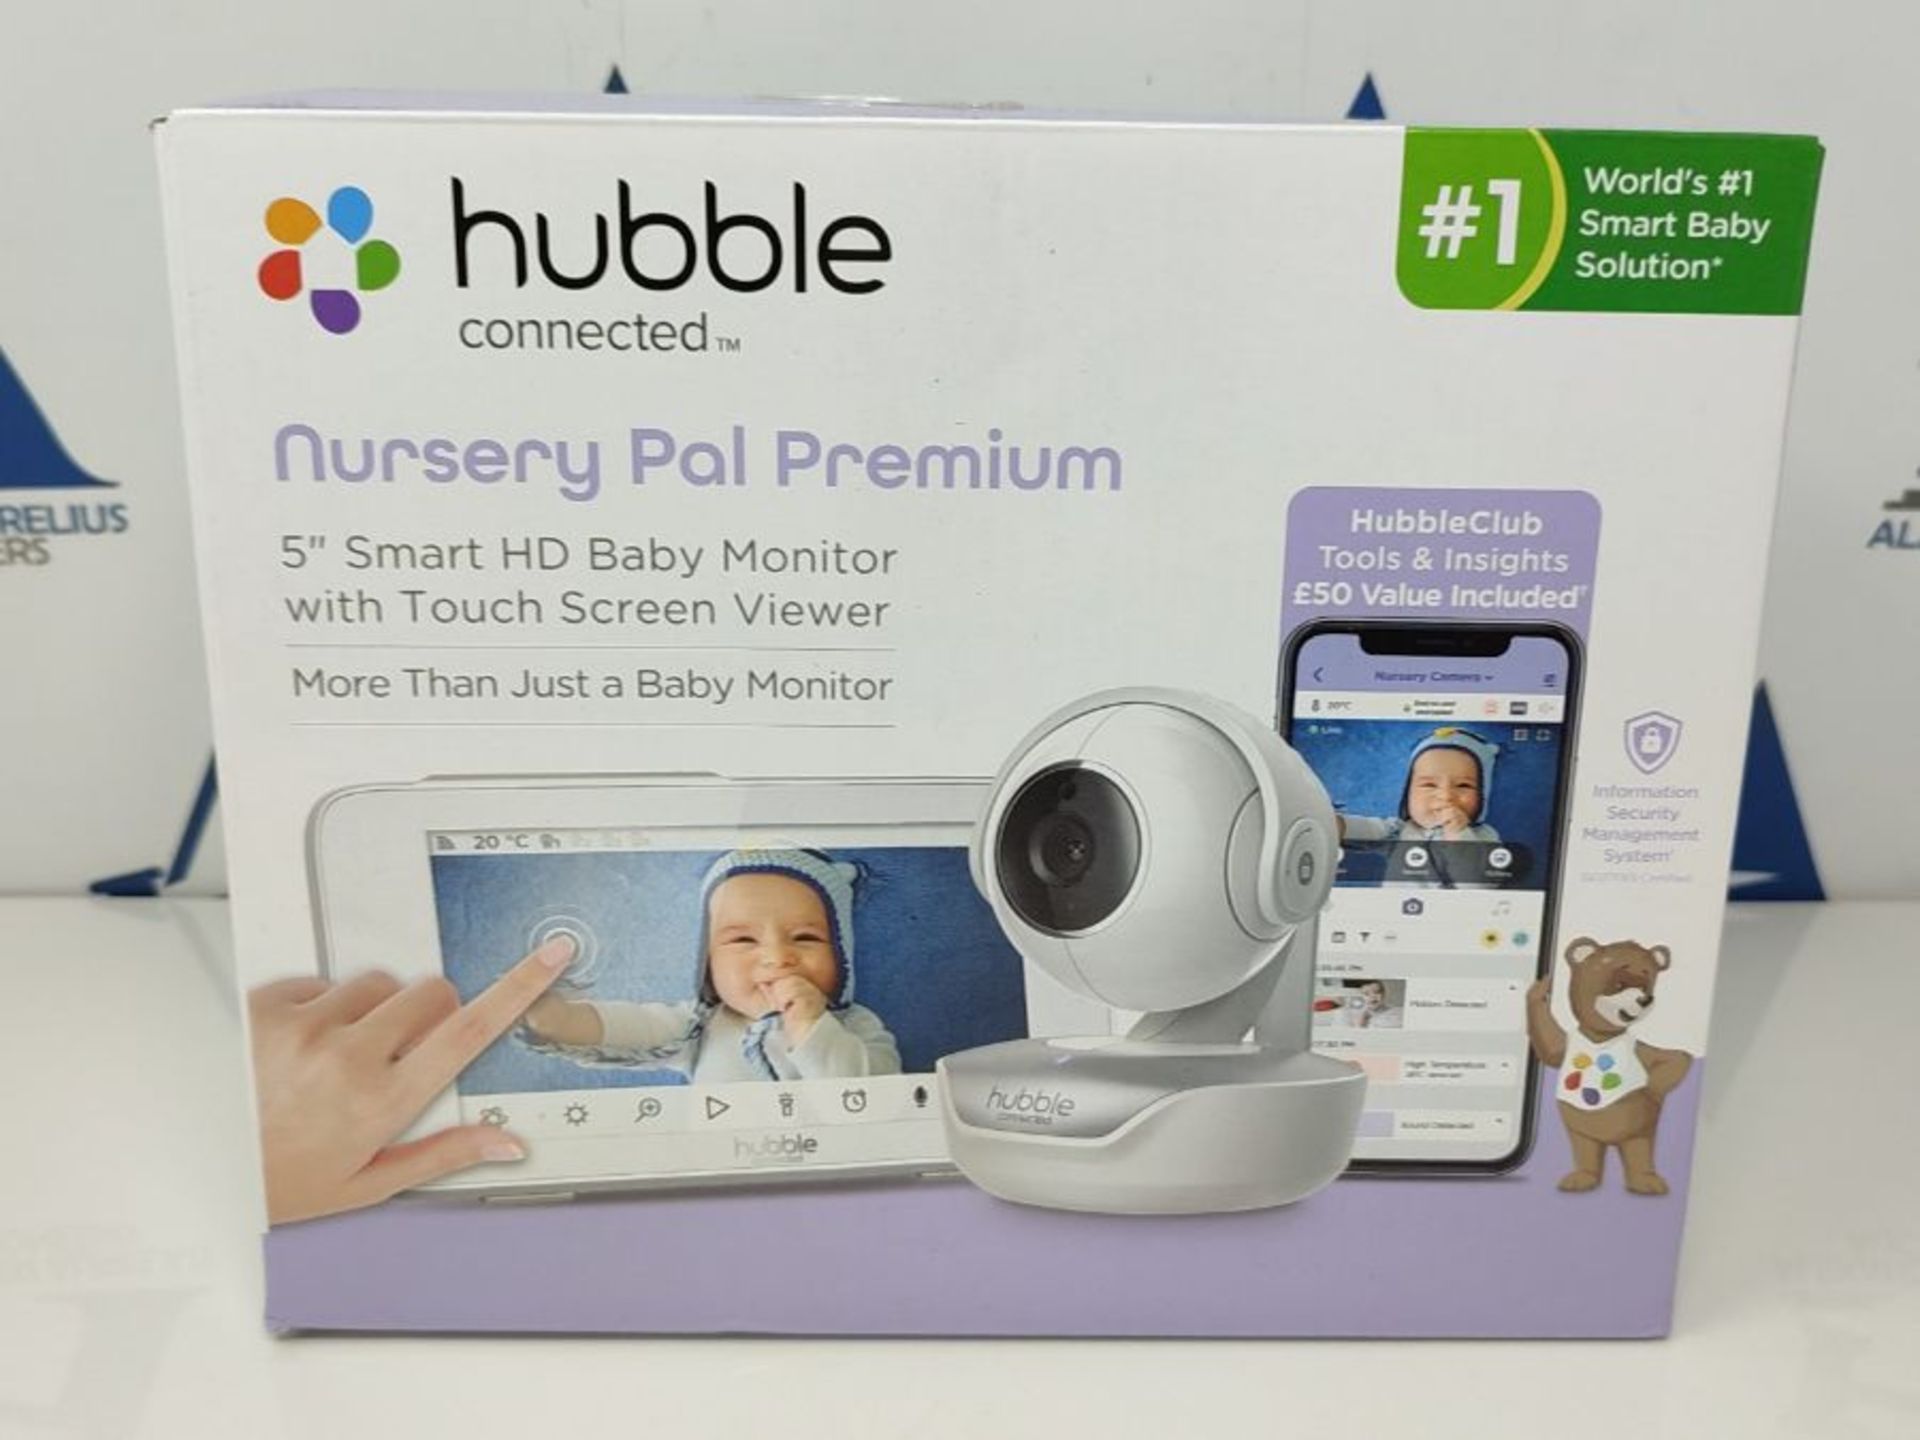 RRP £126.00 Hubble Connected Nursery Pal Premium Smart Video Baby Monitor with 5" Inch Touch Scree